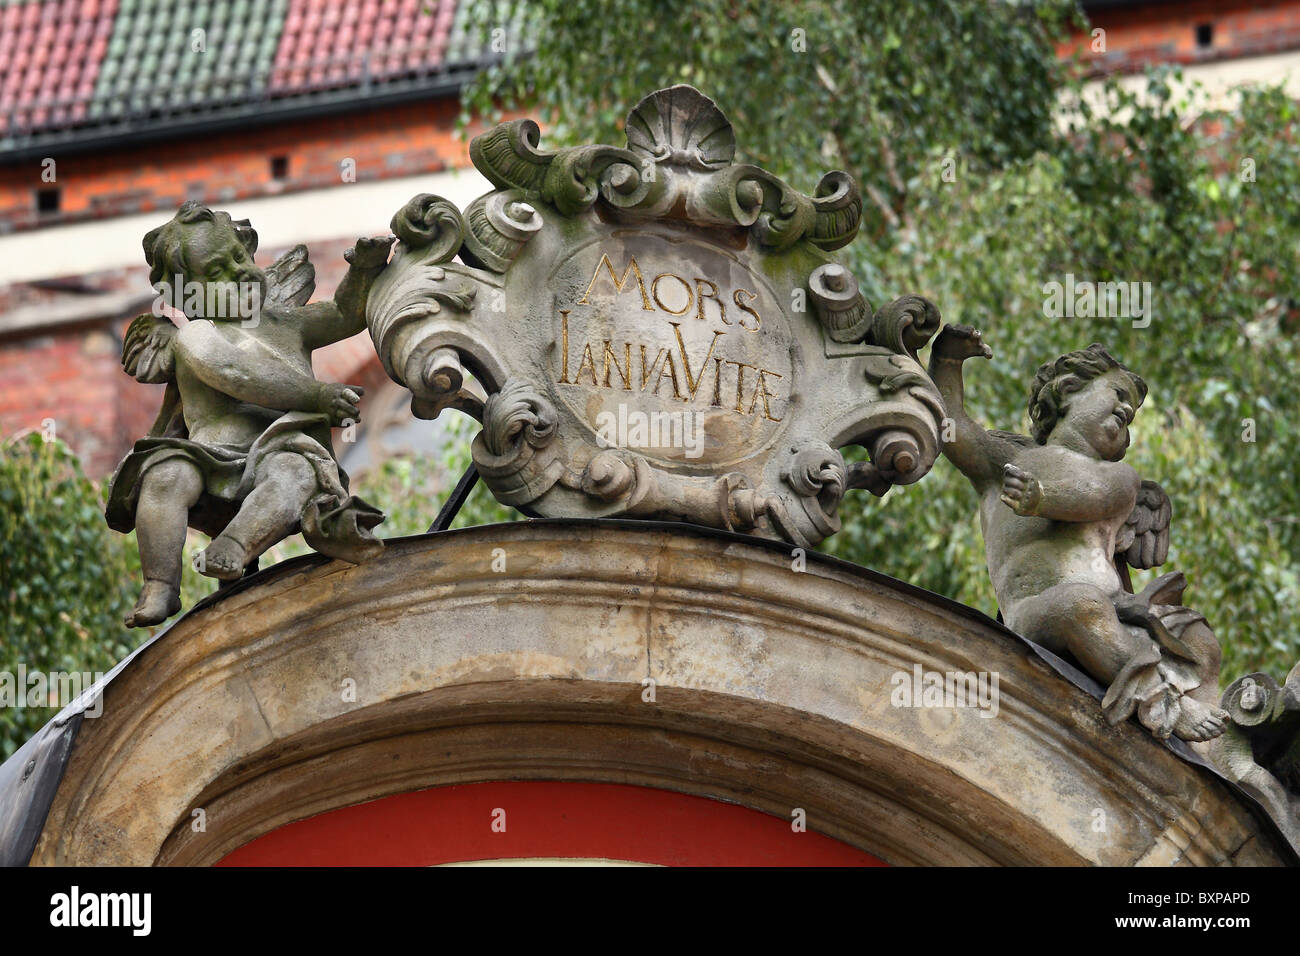 Two cherubs with stone plaque on the top of the gate. Wroclaw near marketplace, Lower Silesia, Poland. Stock Photo